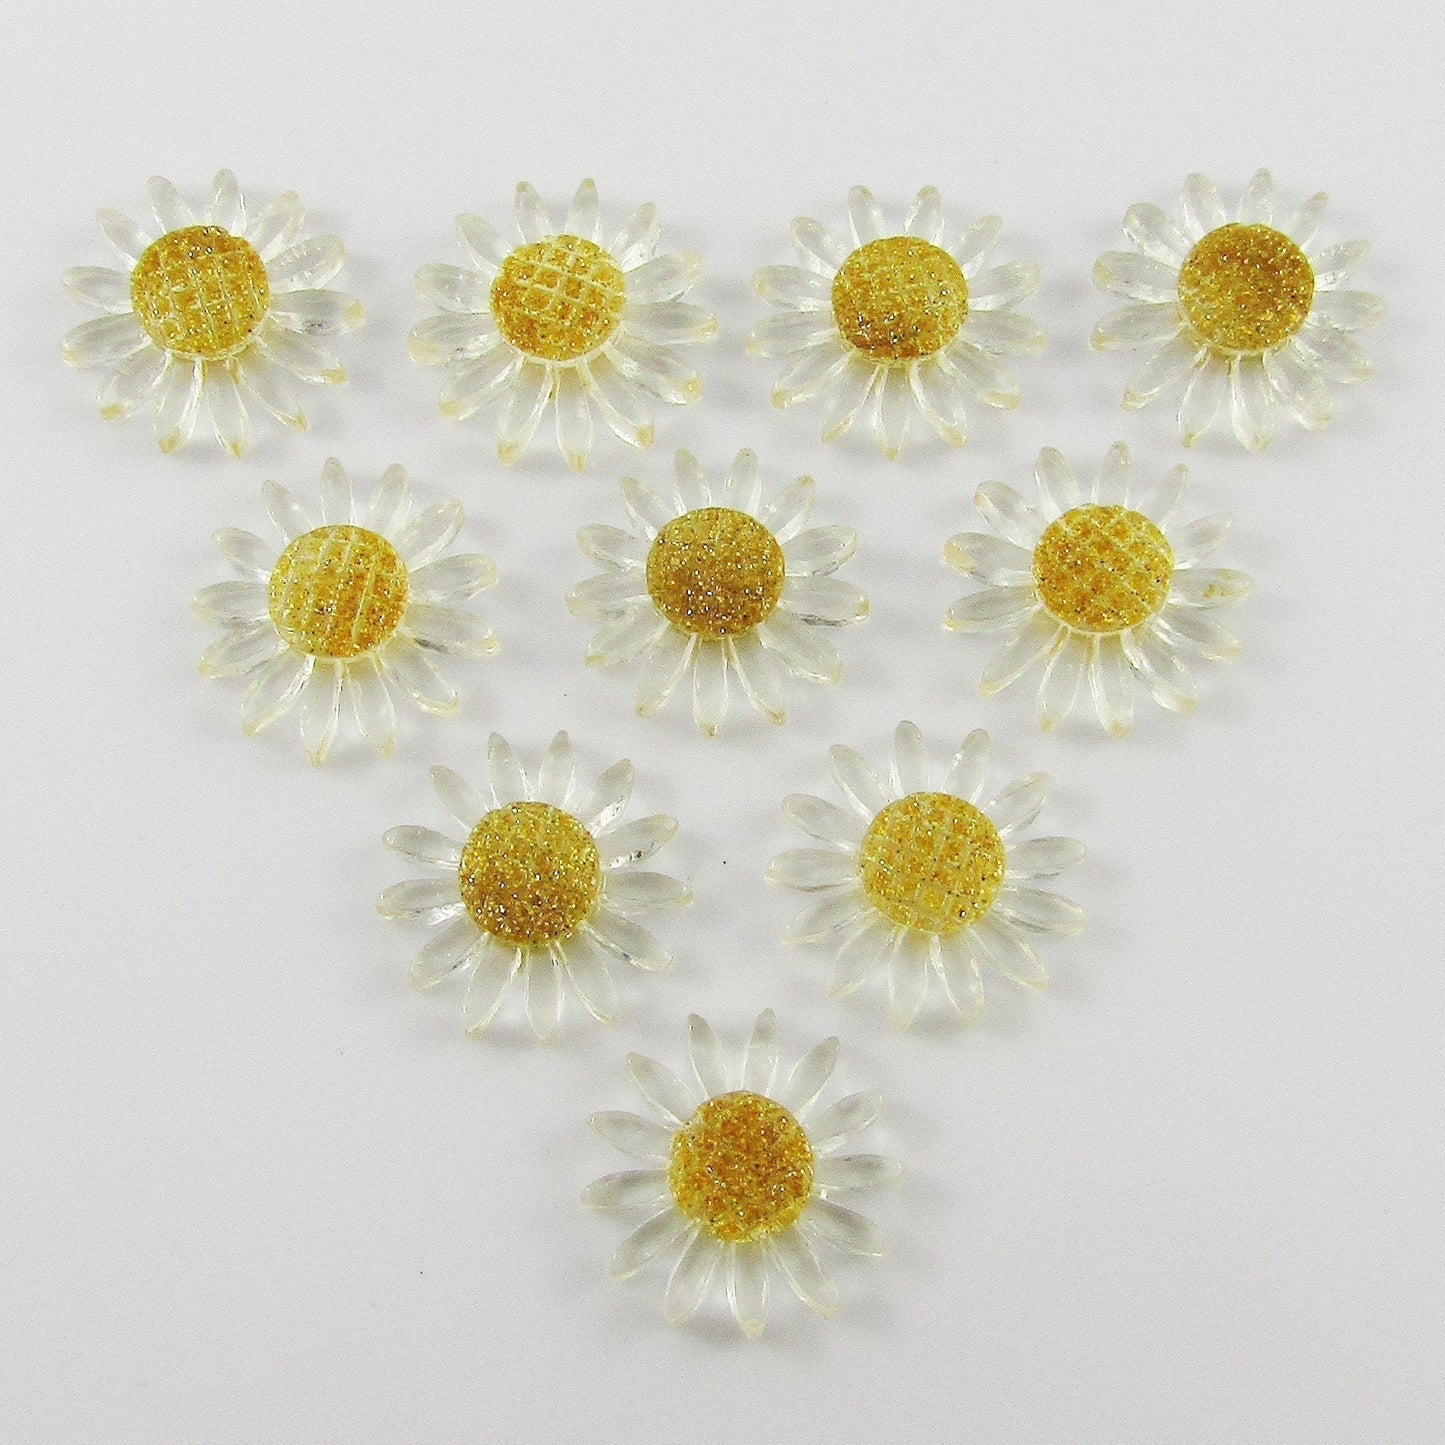 10pcs Resin Glitter Sunflower Cabochon 21mm Scrapbooking Cards Hair Clips